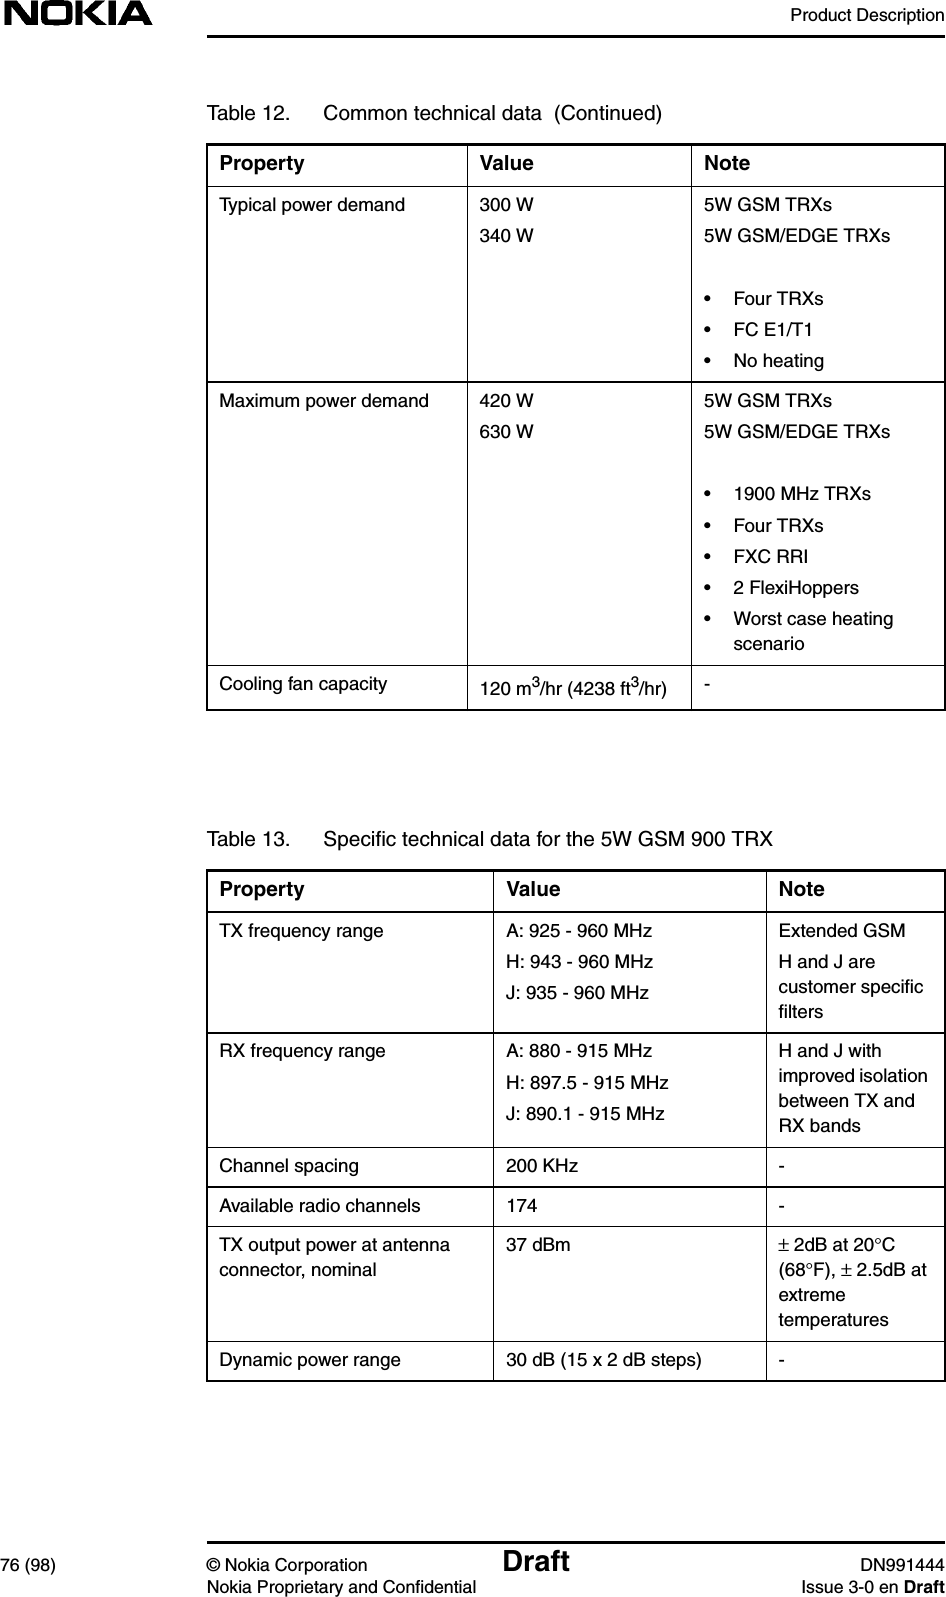 Product Description76 (98) © Nokia Corporation Draft DN991444Nokia Proprietary and Confidential Issue 3-0 en DraftTypical power demand 300 W340 W5W GSM TRXs5W GSM/EDGE TRXs• Four TRXs• FC E1/T1• No heatingMaximum power demand 420 W630 W5W GSM TRXs5W GSM/EDGE TRXs• 1900 MHz TRXs• Four TRXs• FXC RRI• 2 FlexiHoppers• Worst case heatingscenarioCooling fan capacity 120 m3/hr (4238 ft3/hr) -Table 13. Speciﬁc technical data for the 5W GSM 900 TRXProperty Value NoteTX frequency range A: 925 - 960 MHzH: 943 - 960 MHzJ: 935 - 960 MHzExtended GSMH and J arecustomer speciﬁcﬁltersRX frequency range A: 880 - 915 MHzH: 897.5 - 915 MHzJ: 890.1 - 915 MHzH and J withimproved isolationbetween TX andRX bandsChannel spacing 200 KHz -Available radio channels 174 -TX output power at antennaconnector, nominal37 dBm ± 2dB at 20°C(68°F), ± 2.5dB atextremetemperaturesDynamic power range 30 dB (15 x 2 dB steps) -Table 12. Common technical data  (Continued)Property Value Note